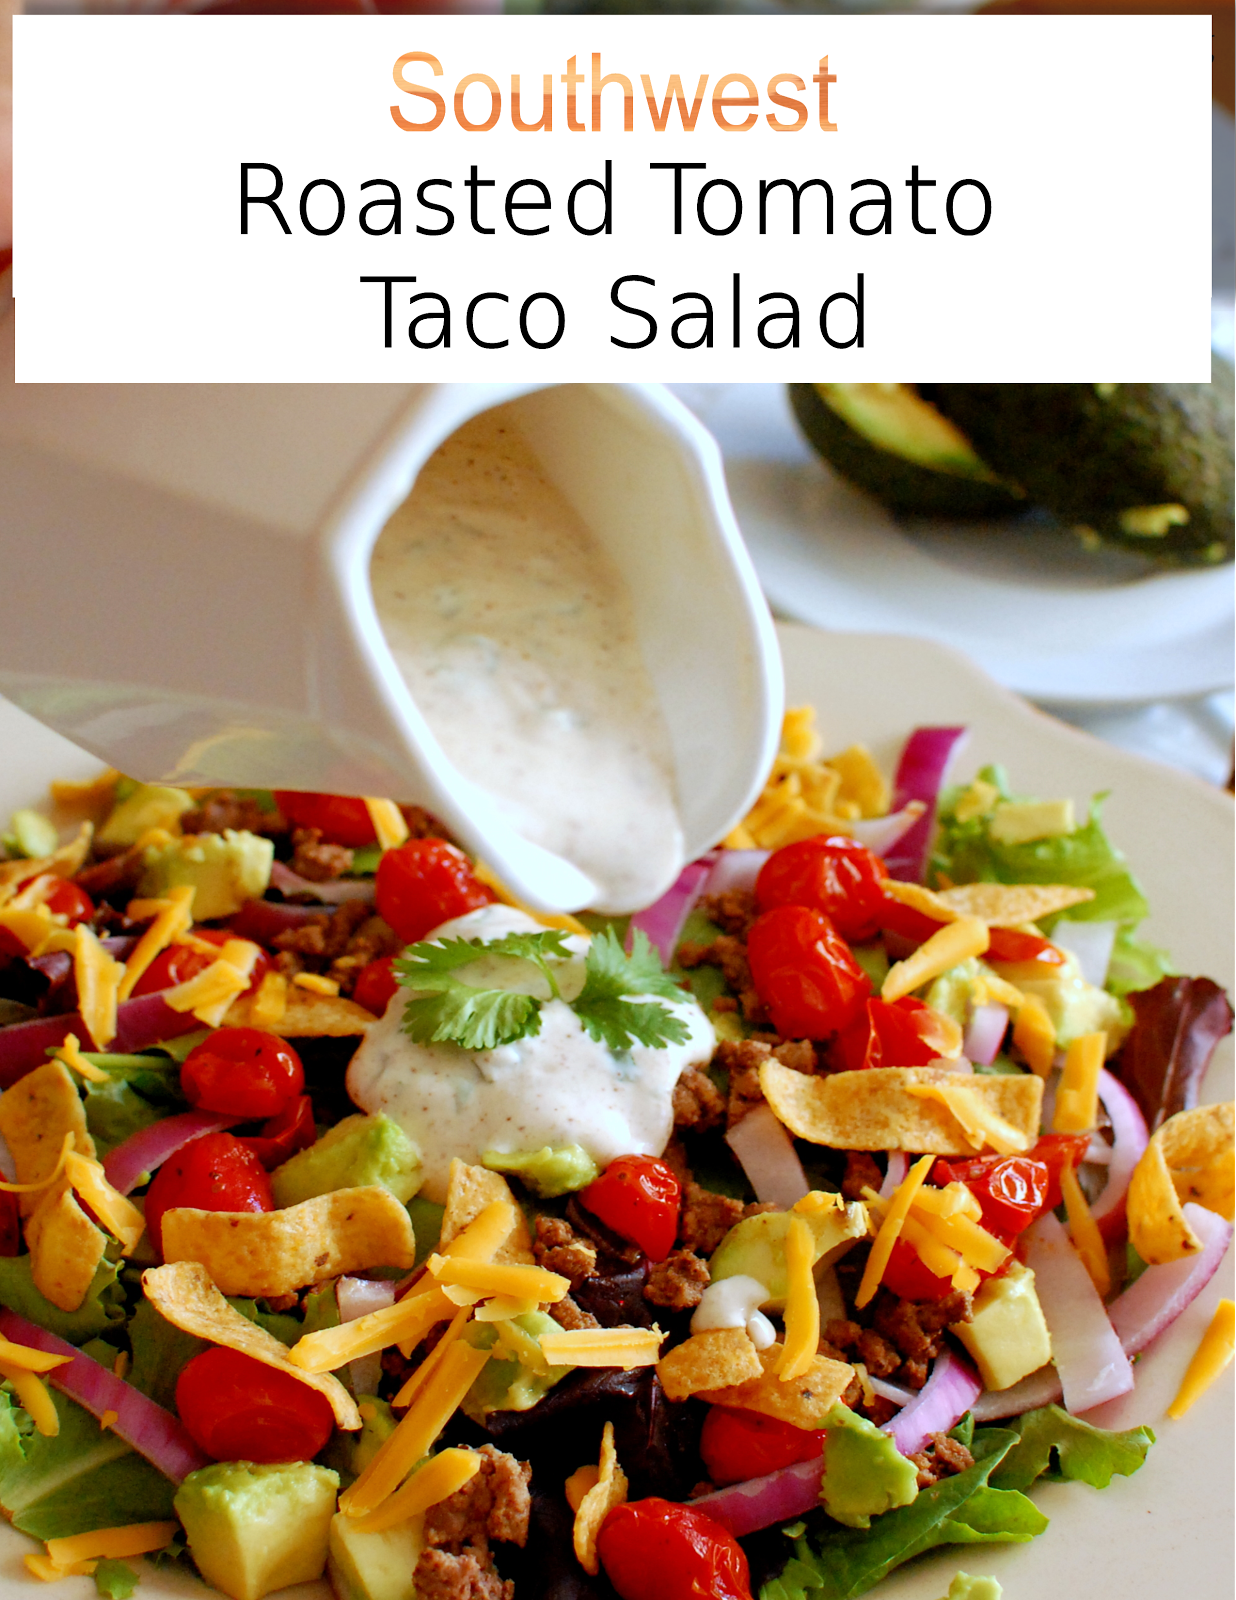 A Sprinkle of This and That: Southwest Roasted Tomato Taco Salad